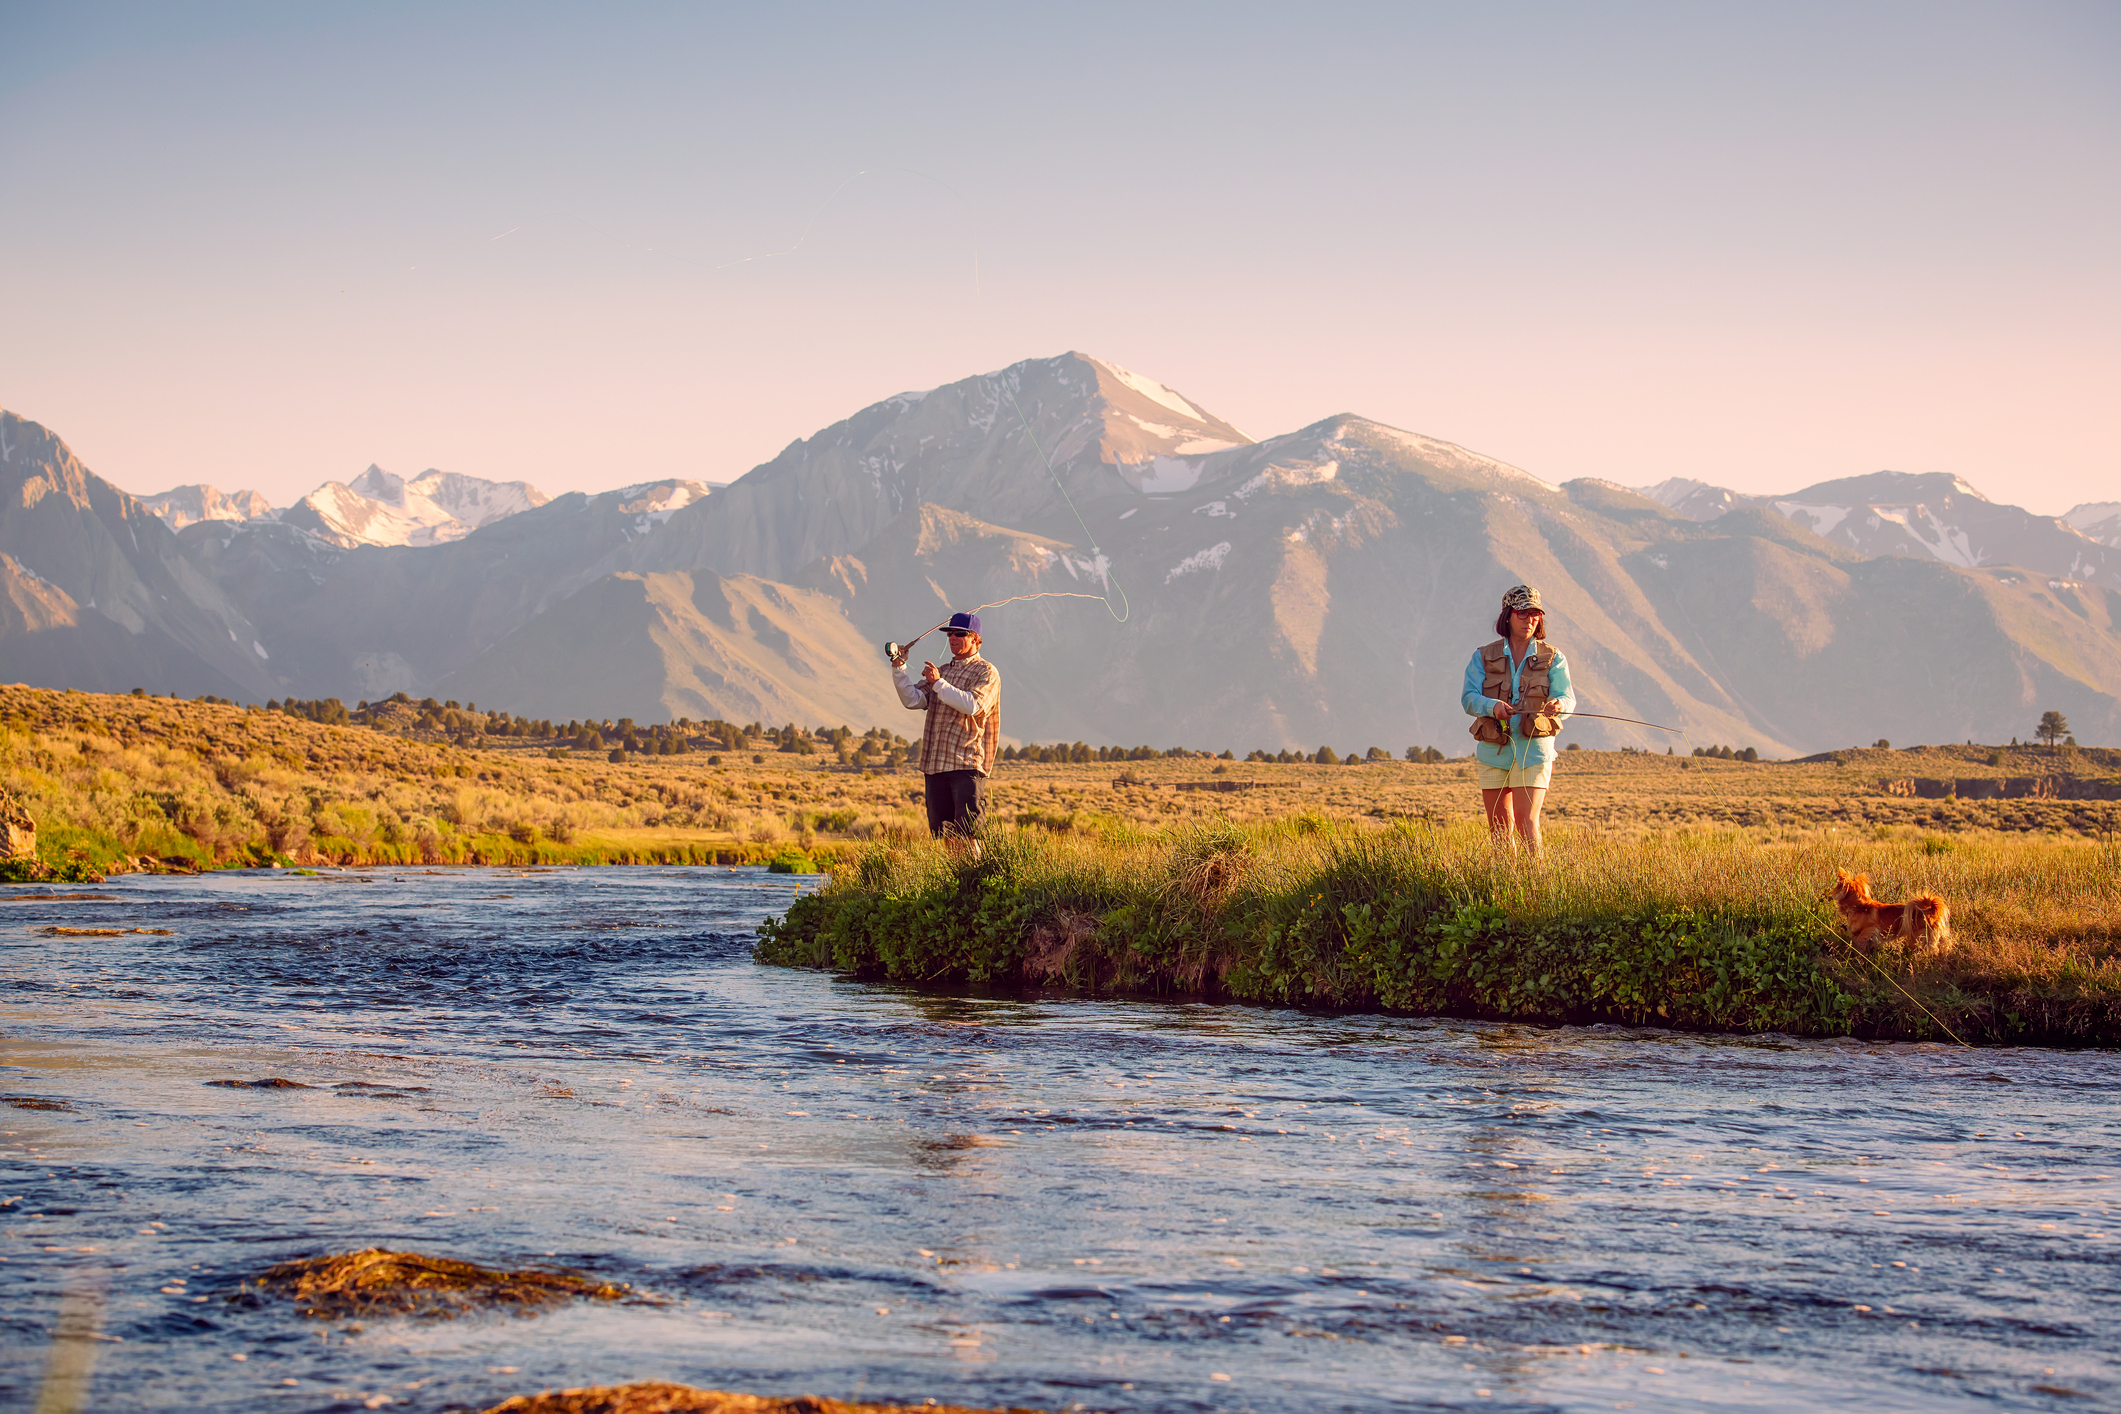 Two people fishing by a river with a mountain backdrop, one person gesturing